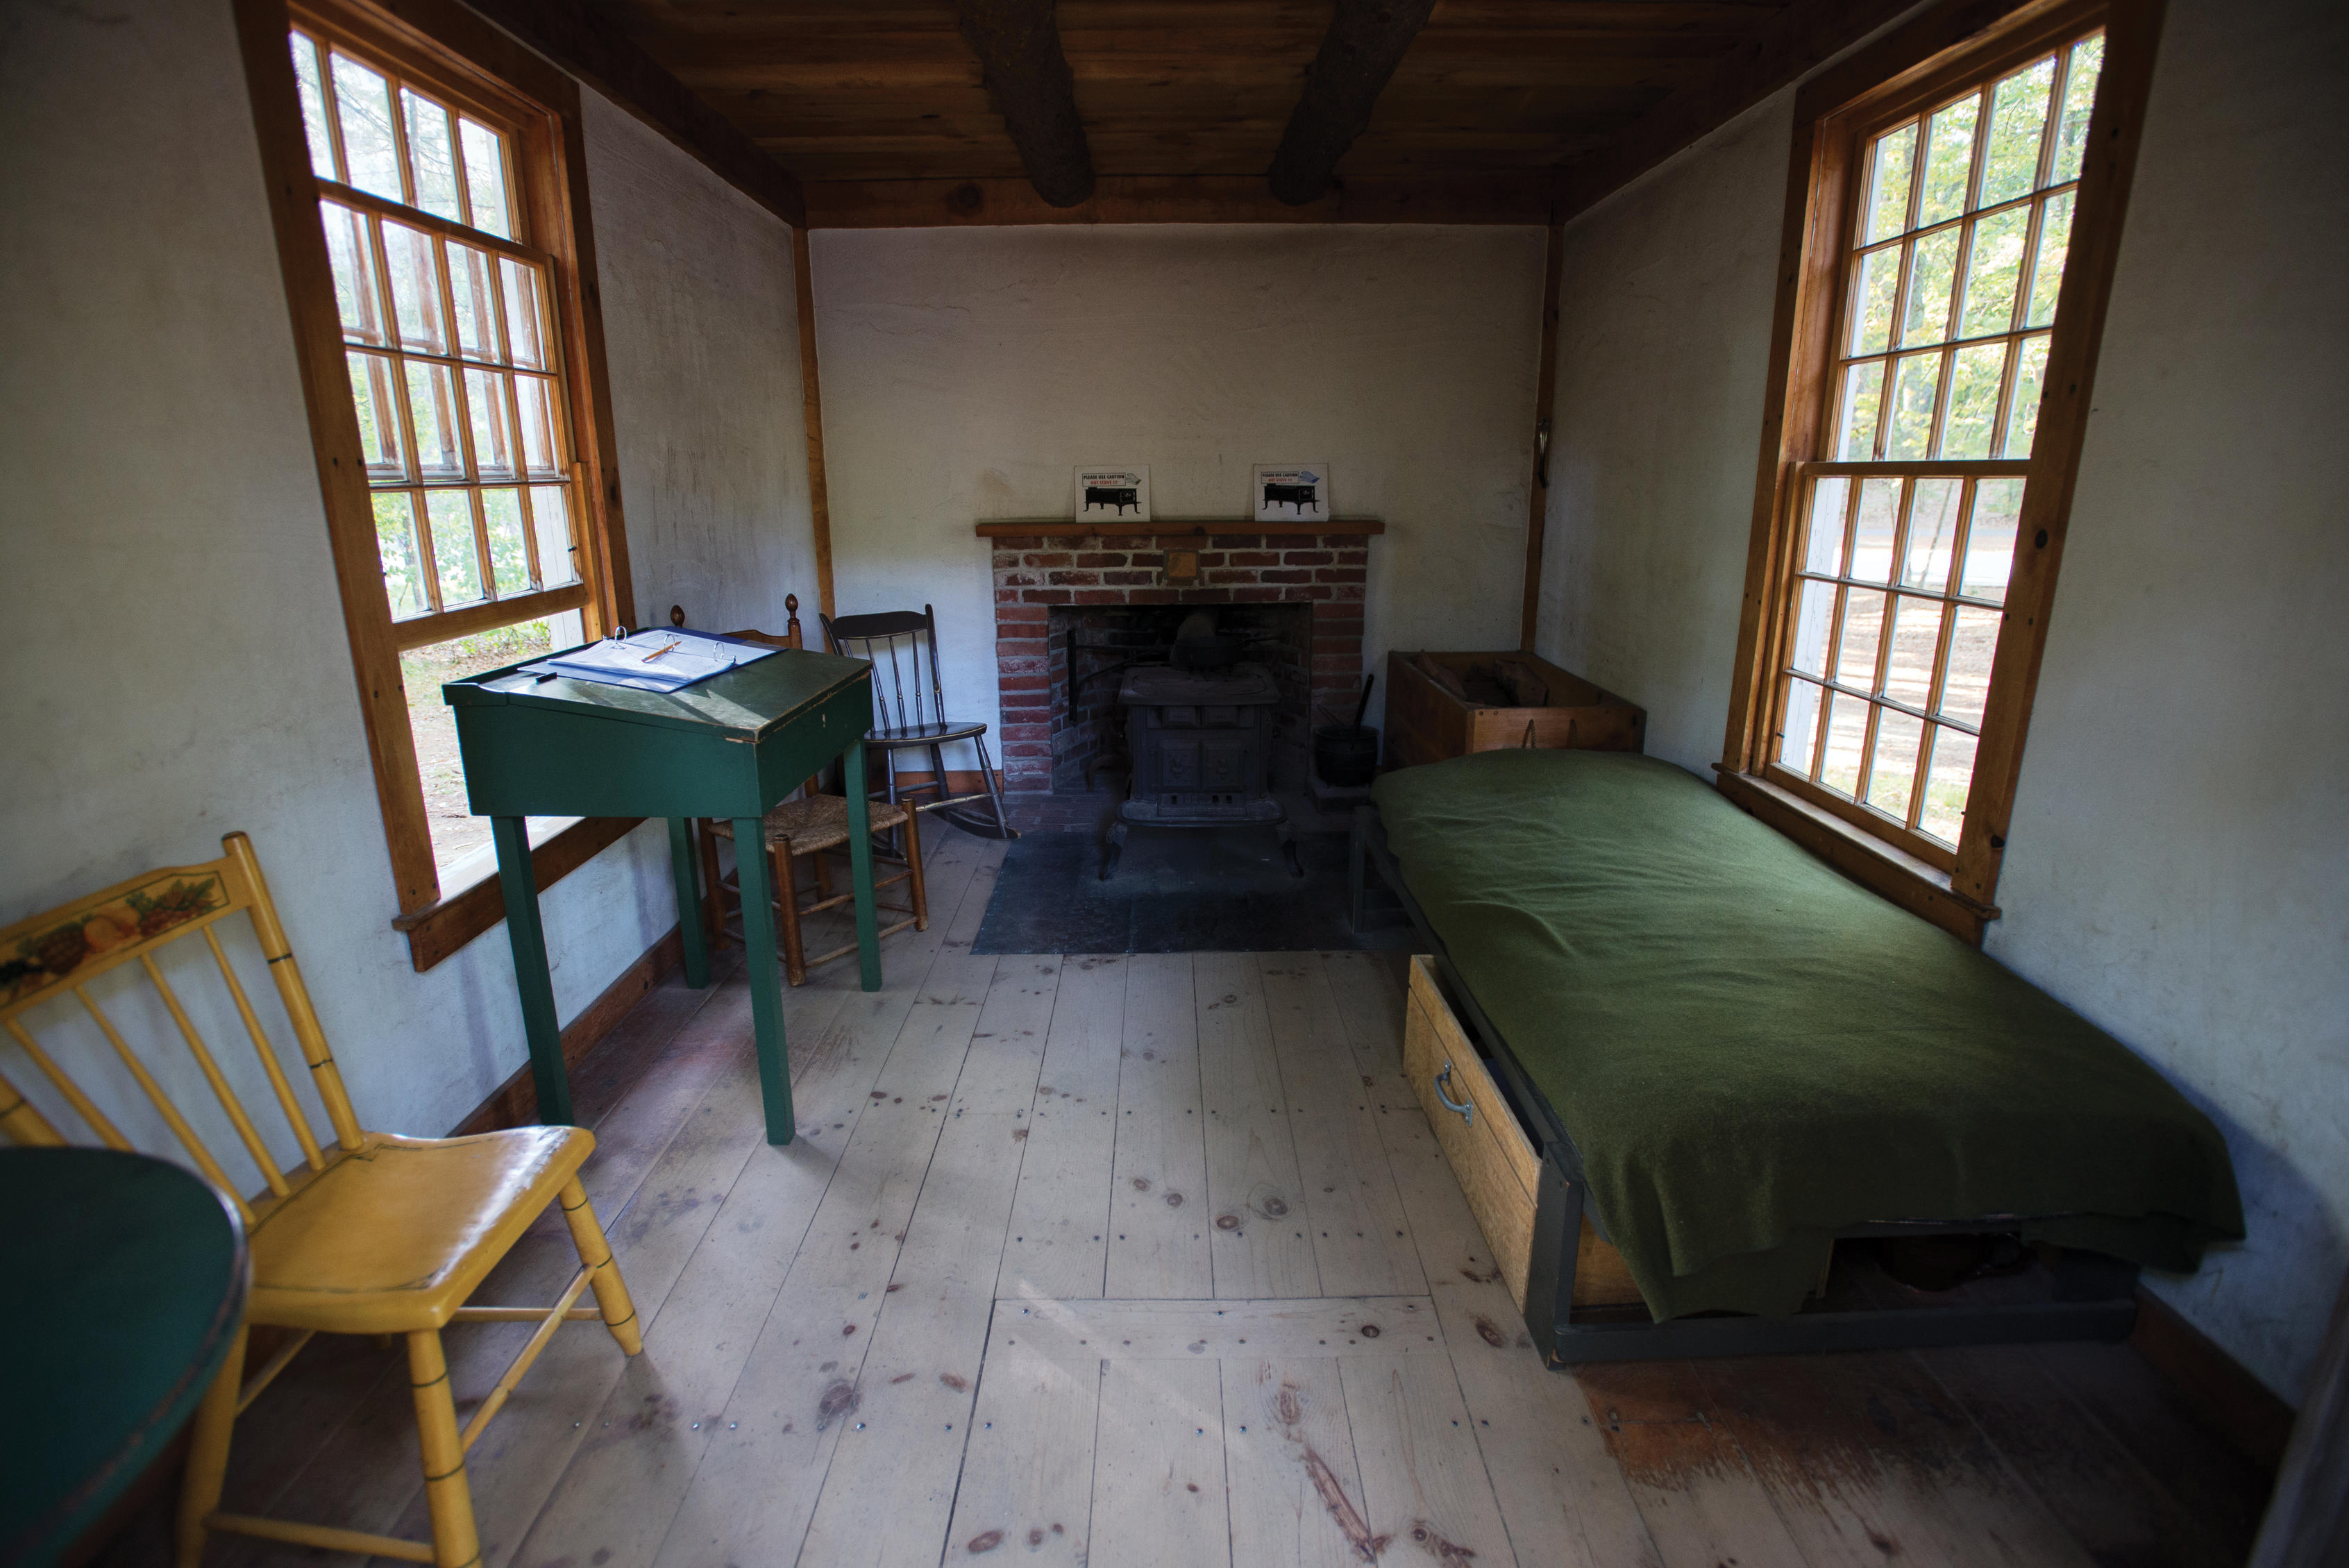 Picture of a basic bedroom with a fireplace, cot, and writing desk.